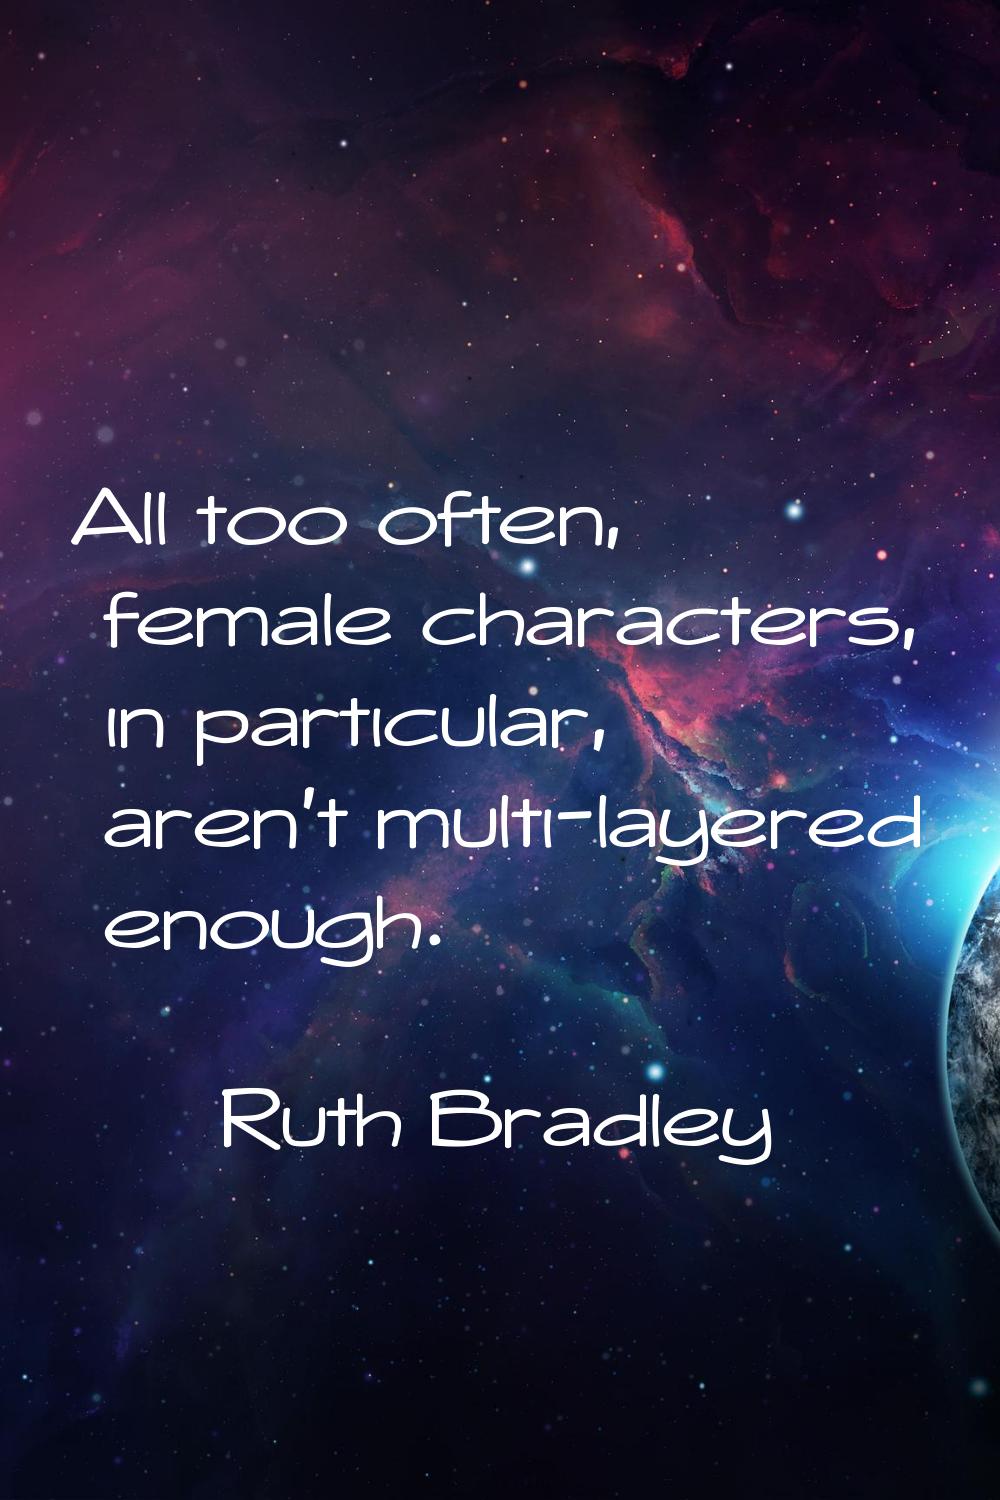 All too often, female characters, in particular, aren't multi-layered enough.